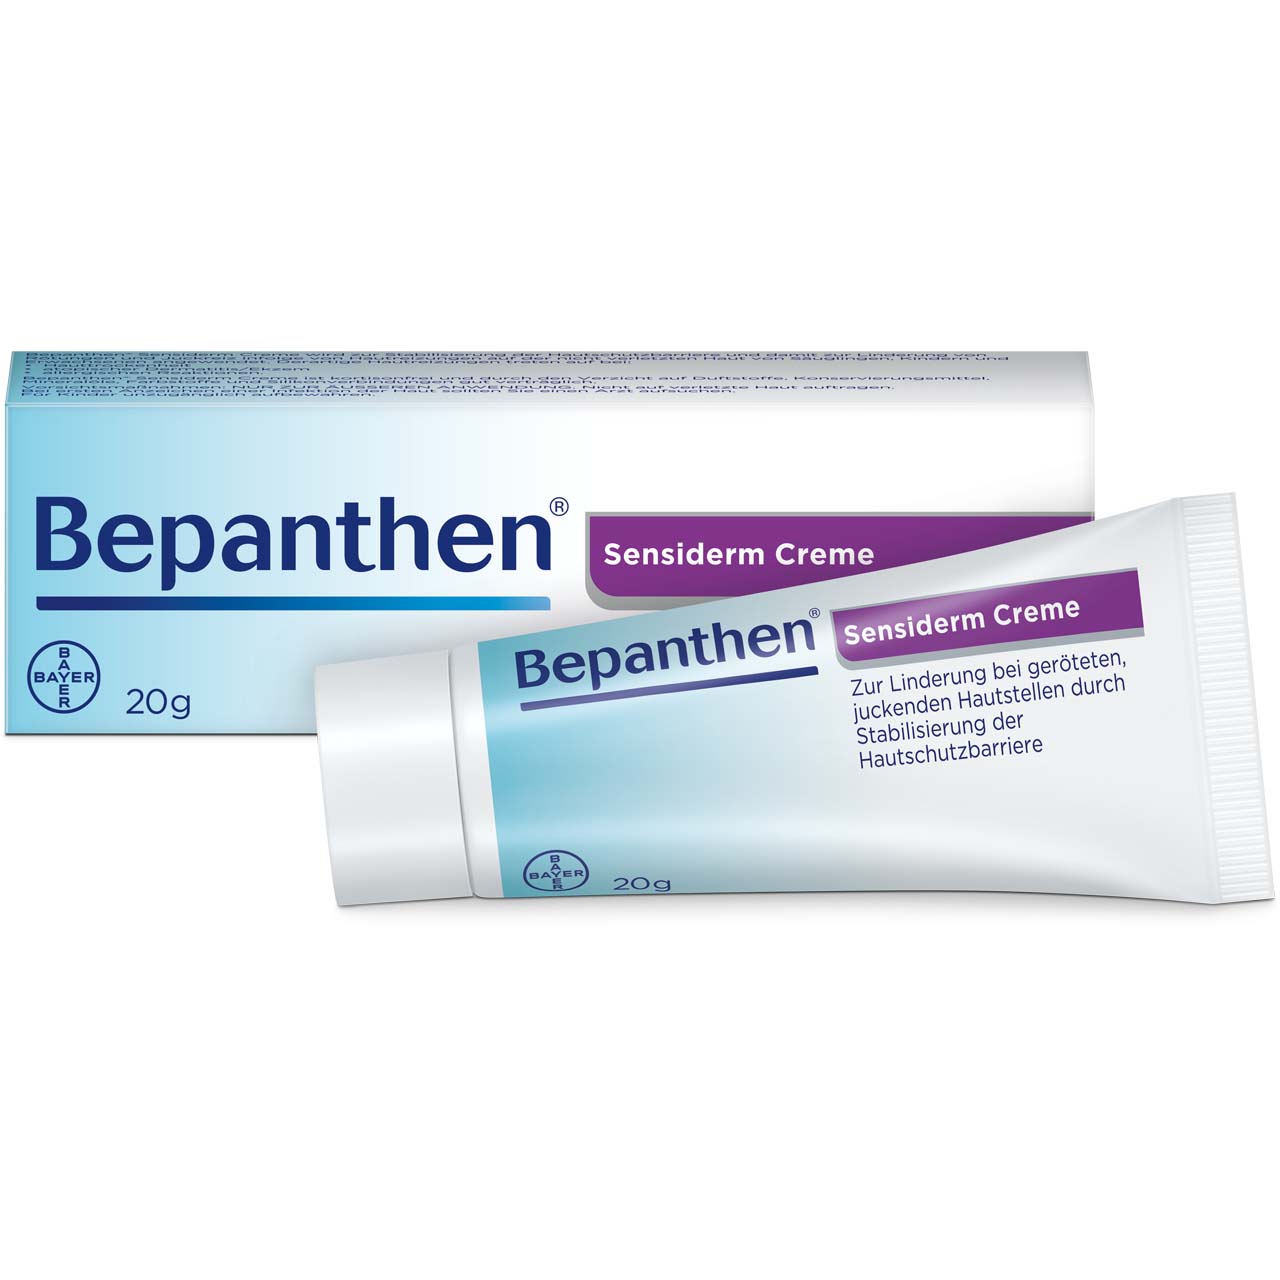 Bepanthen Sensiderm cream for relief of reddened, itchy skin areas by stabilizing the skin barrier